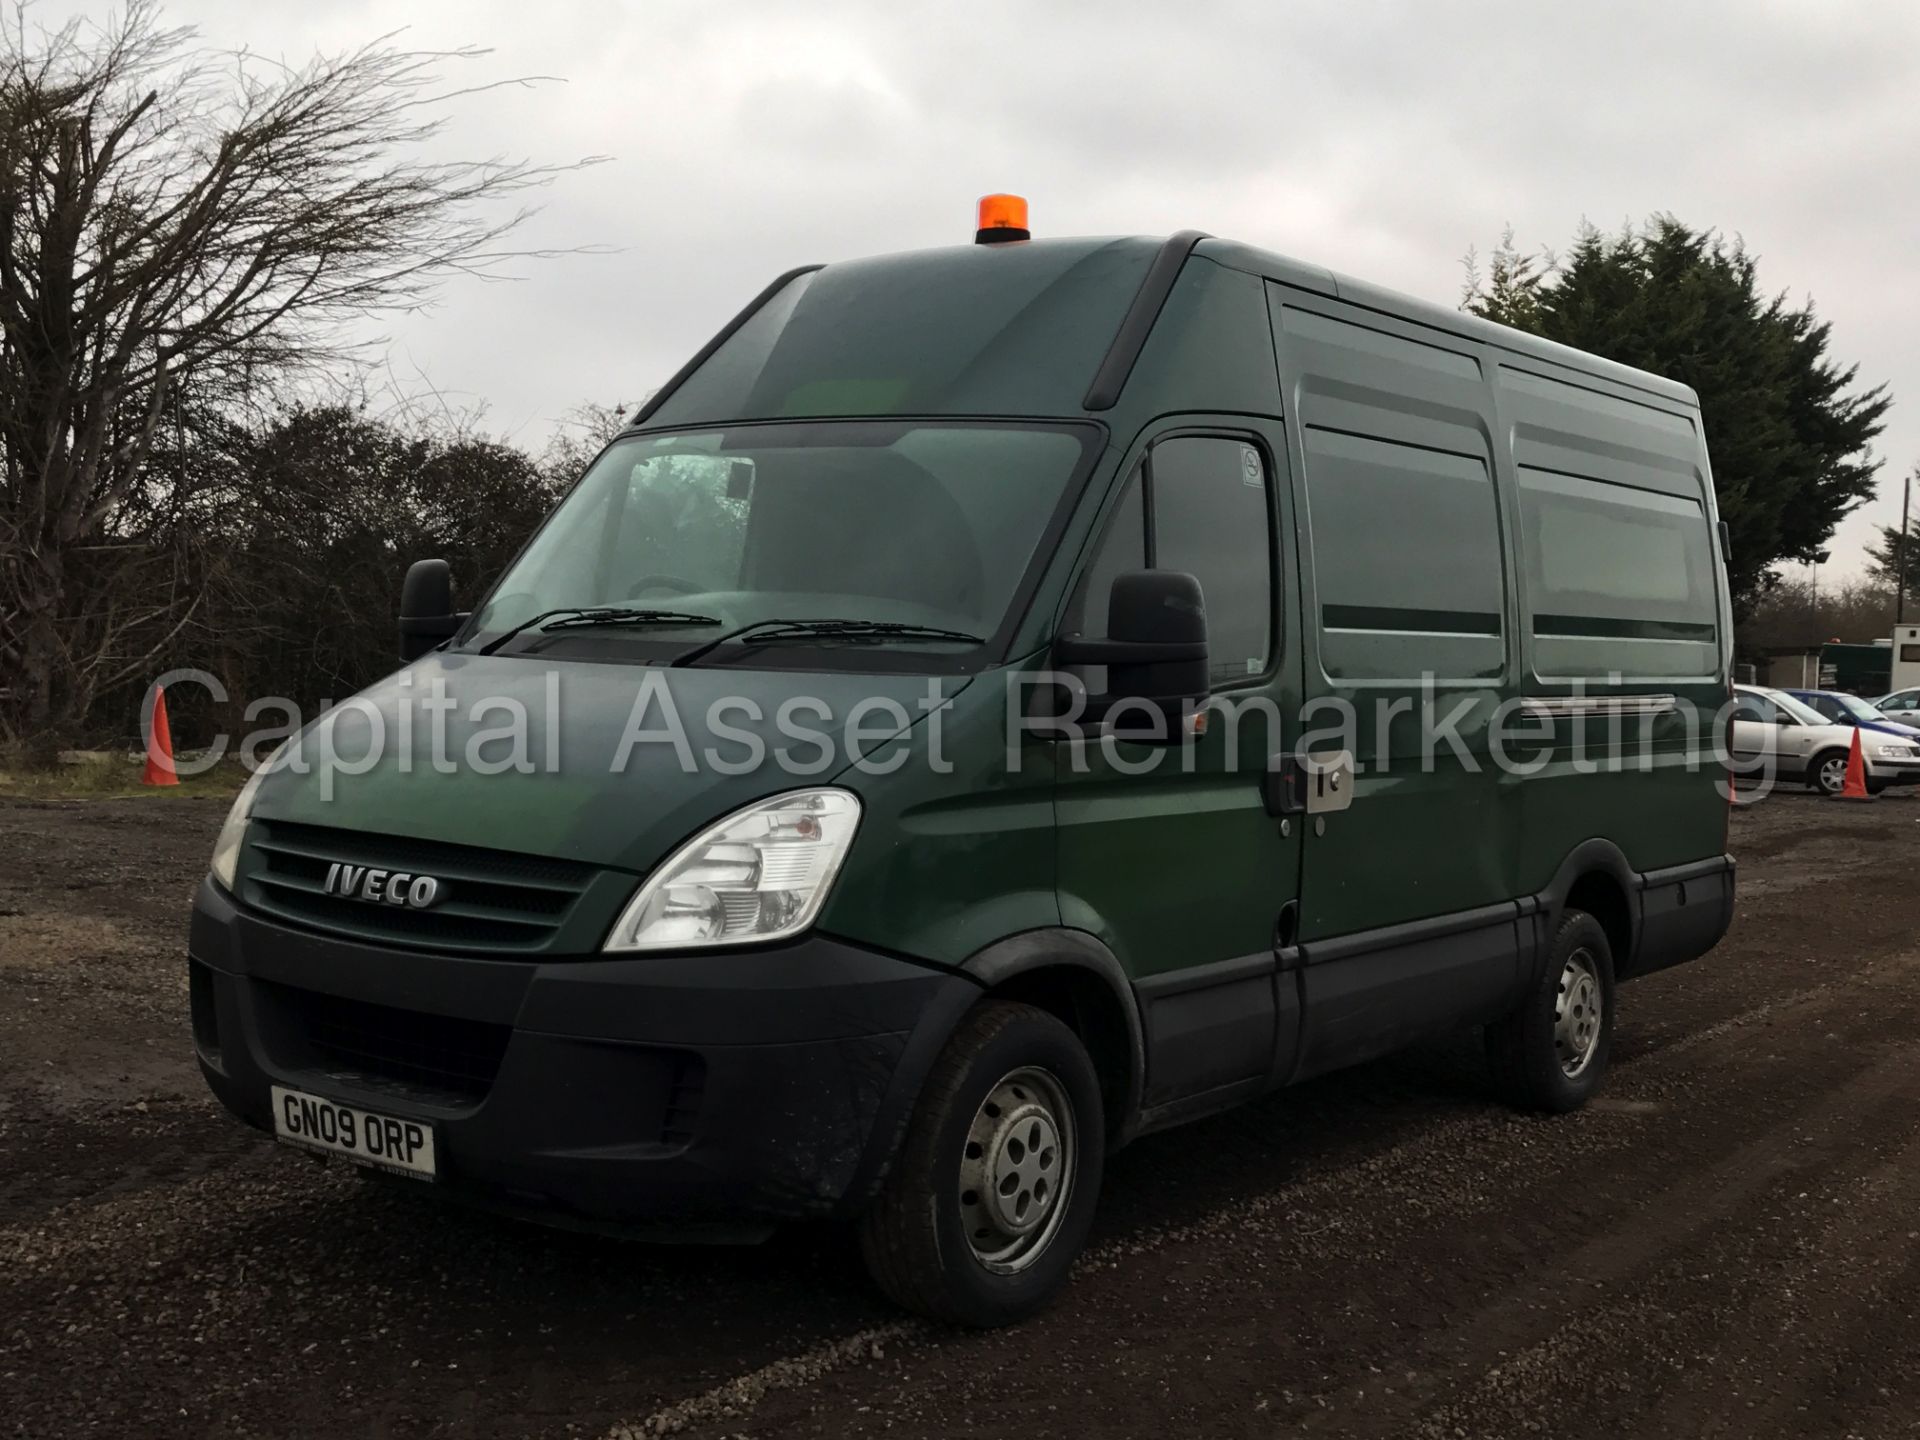 (On Sale) IVECO DAILY 35S12 'MWB HI-ROOF' (2009) '2.3 DIESEL - 120 BHP - 5 SPEED' (1 COMPANY OWNER) - Image 5 of 15